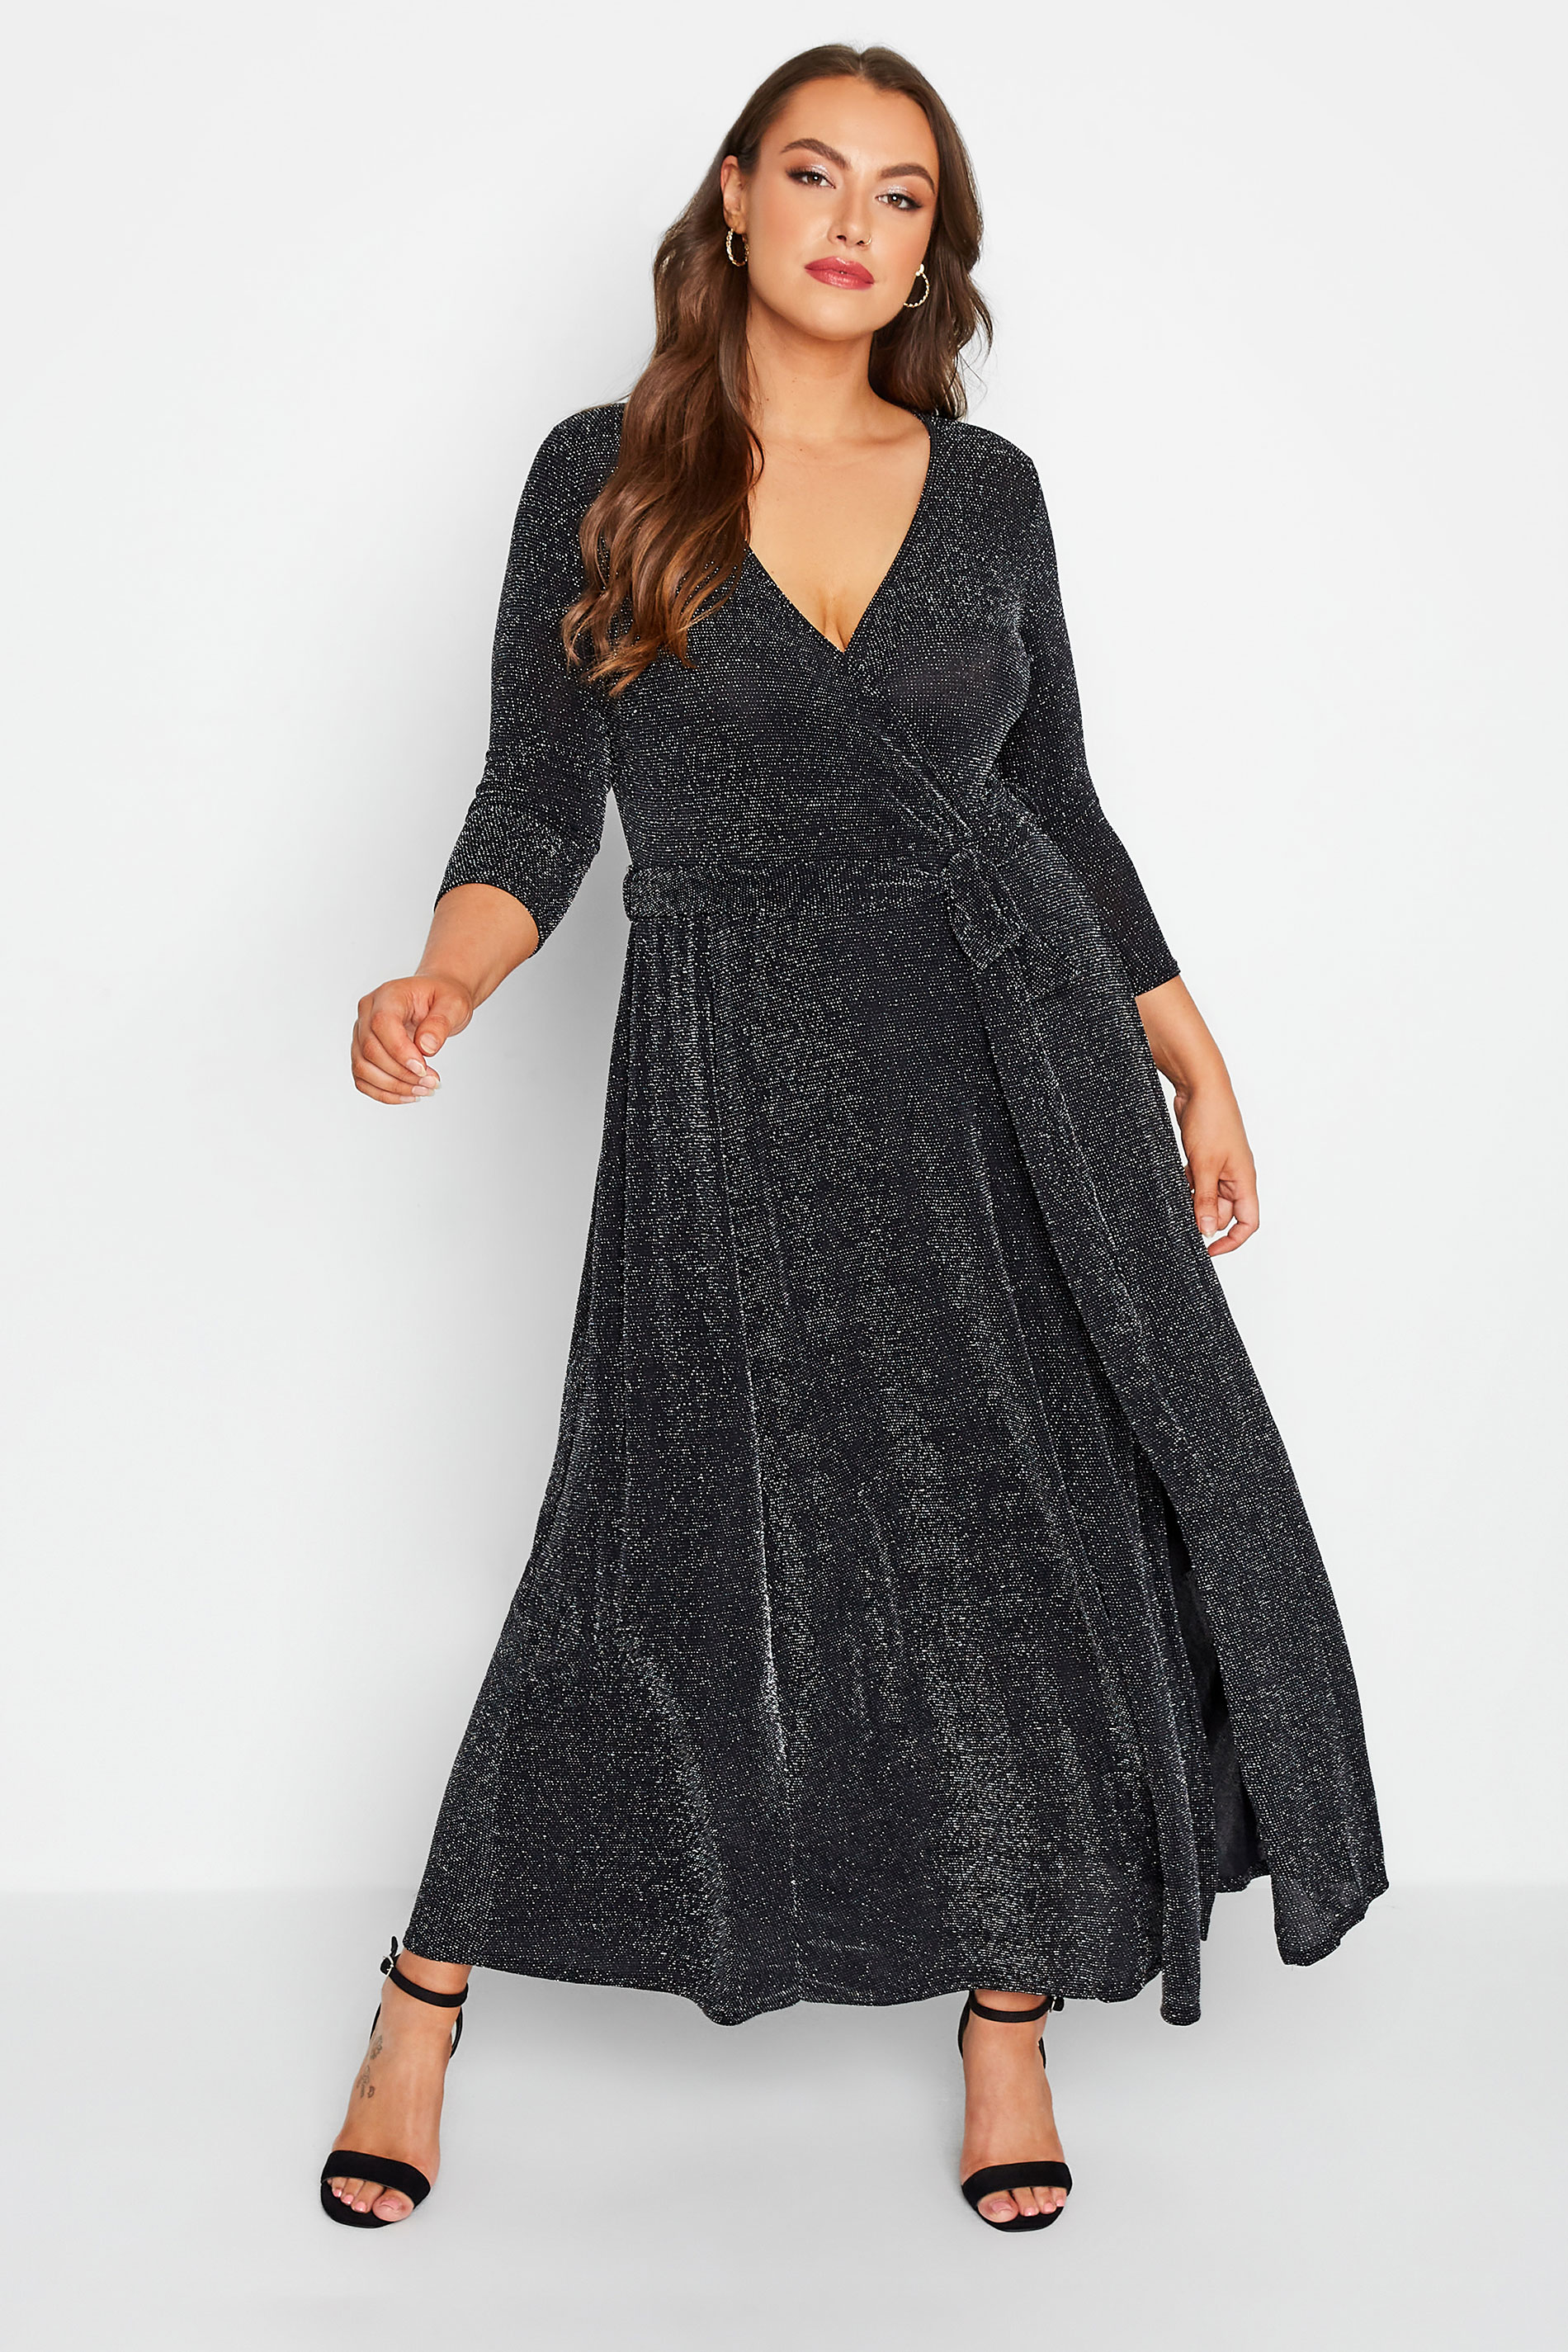 YOURS LONDON Plus Size Black & Silver Glitter Wrap Dress | Yours Clothing 1